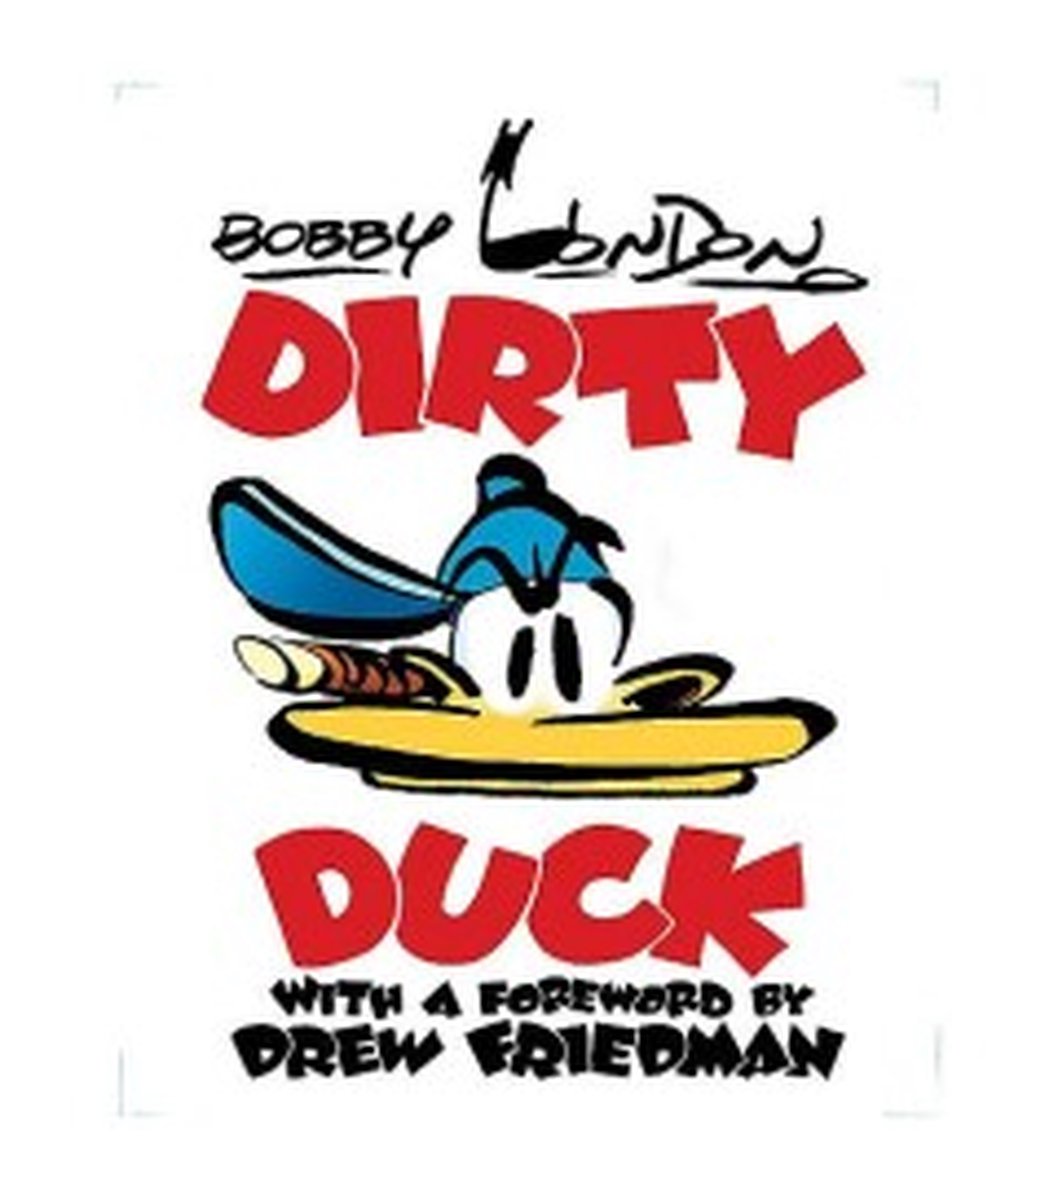 Duck dirty The Dirty